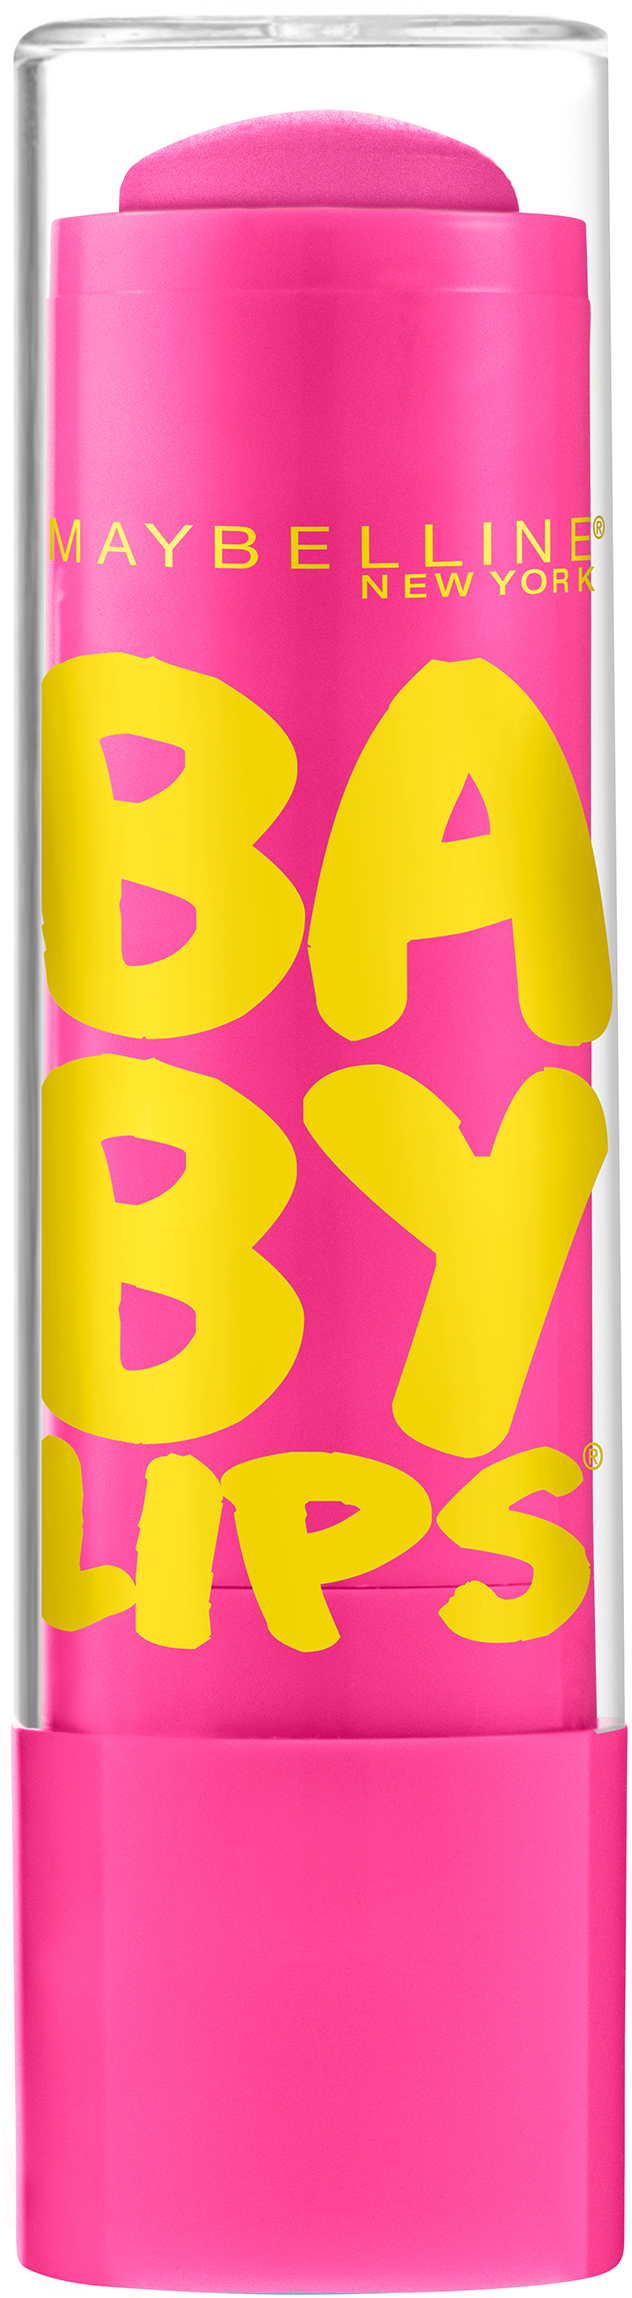 Maybelline Baby Lips Pink Punch Blister